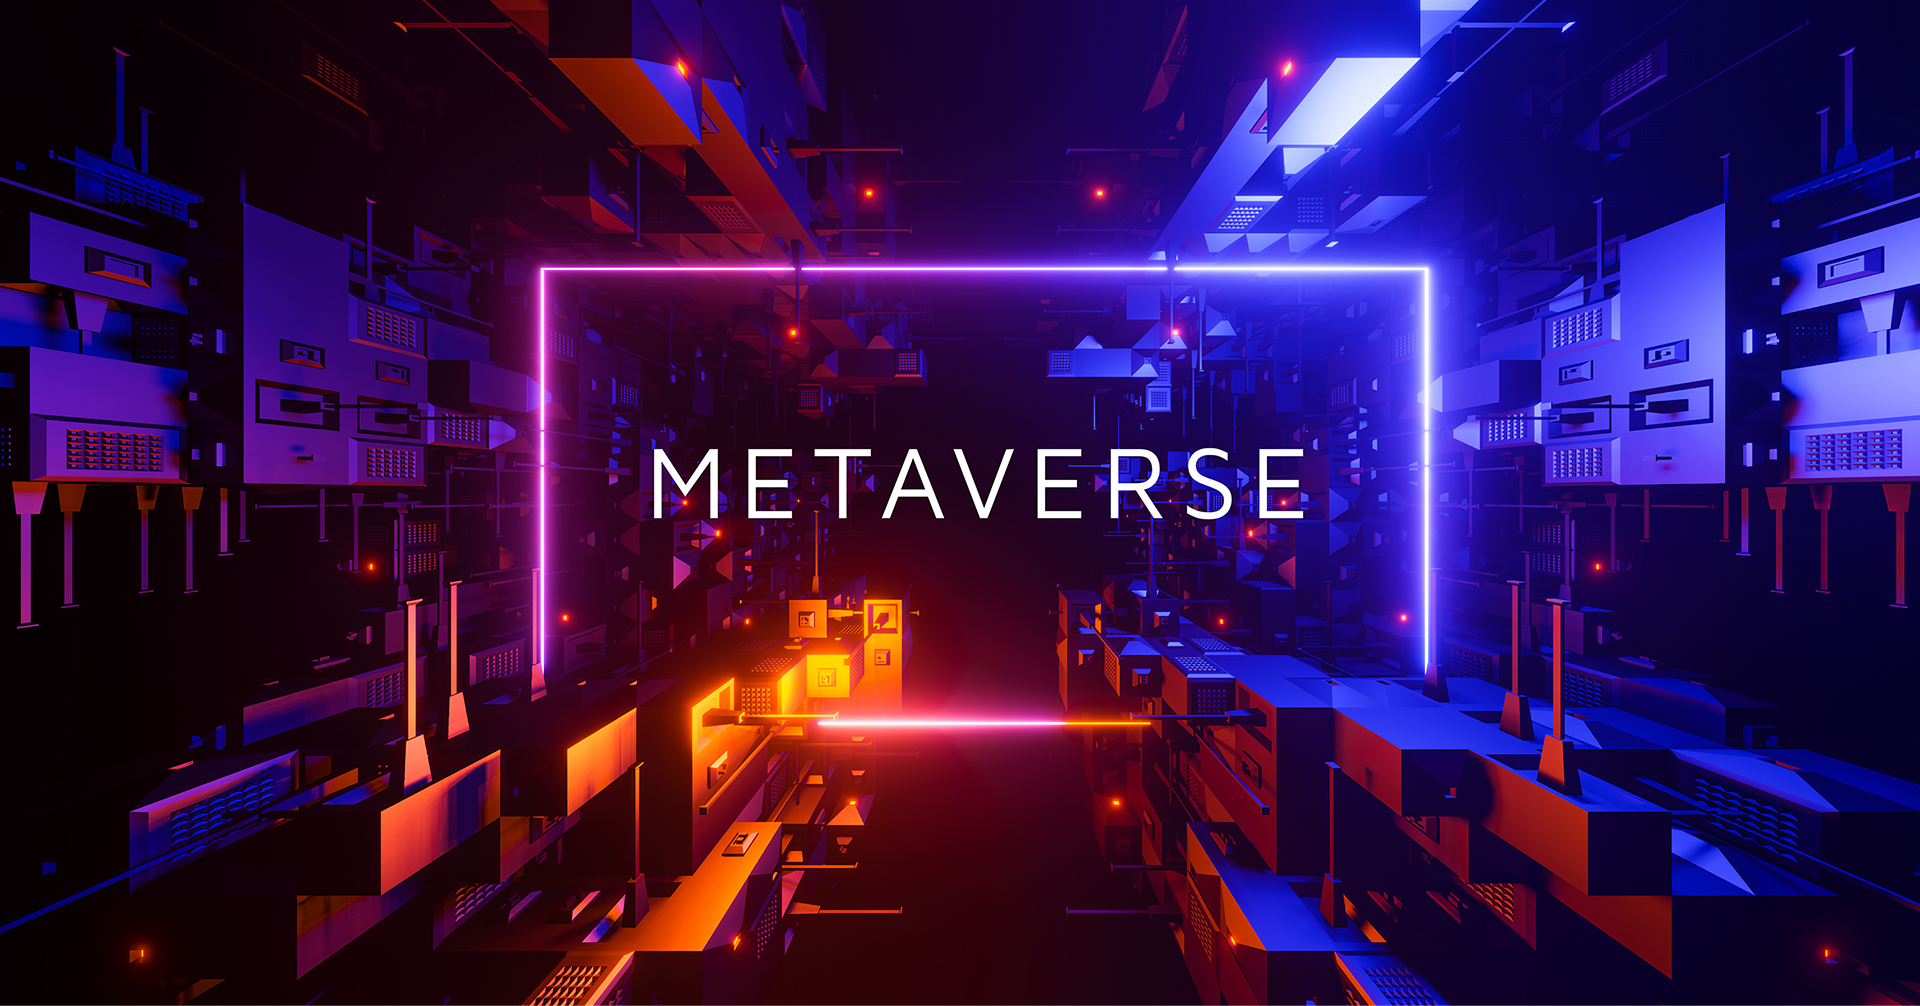 All of the thing in life can combined with metaverse, and of course, in car can fulfilled metaverse.